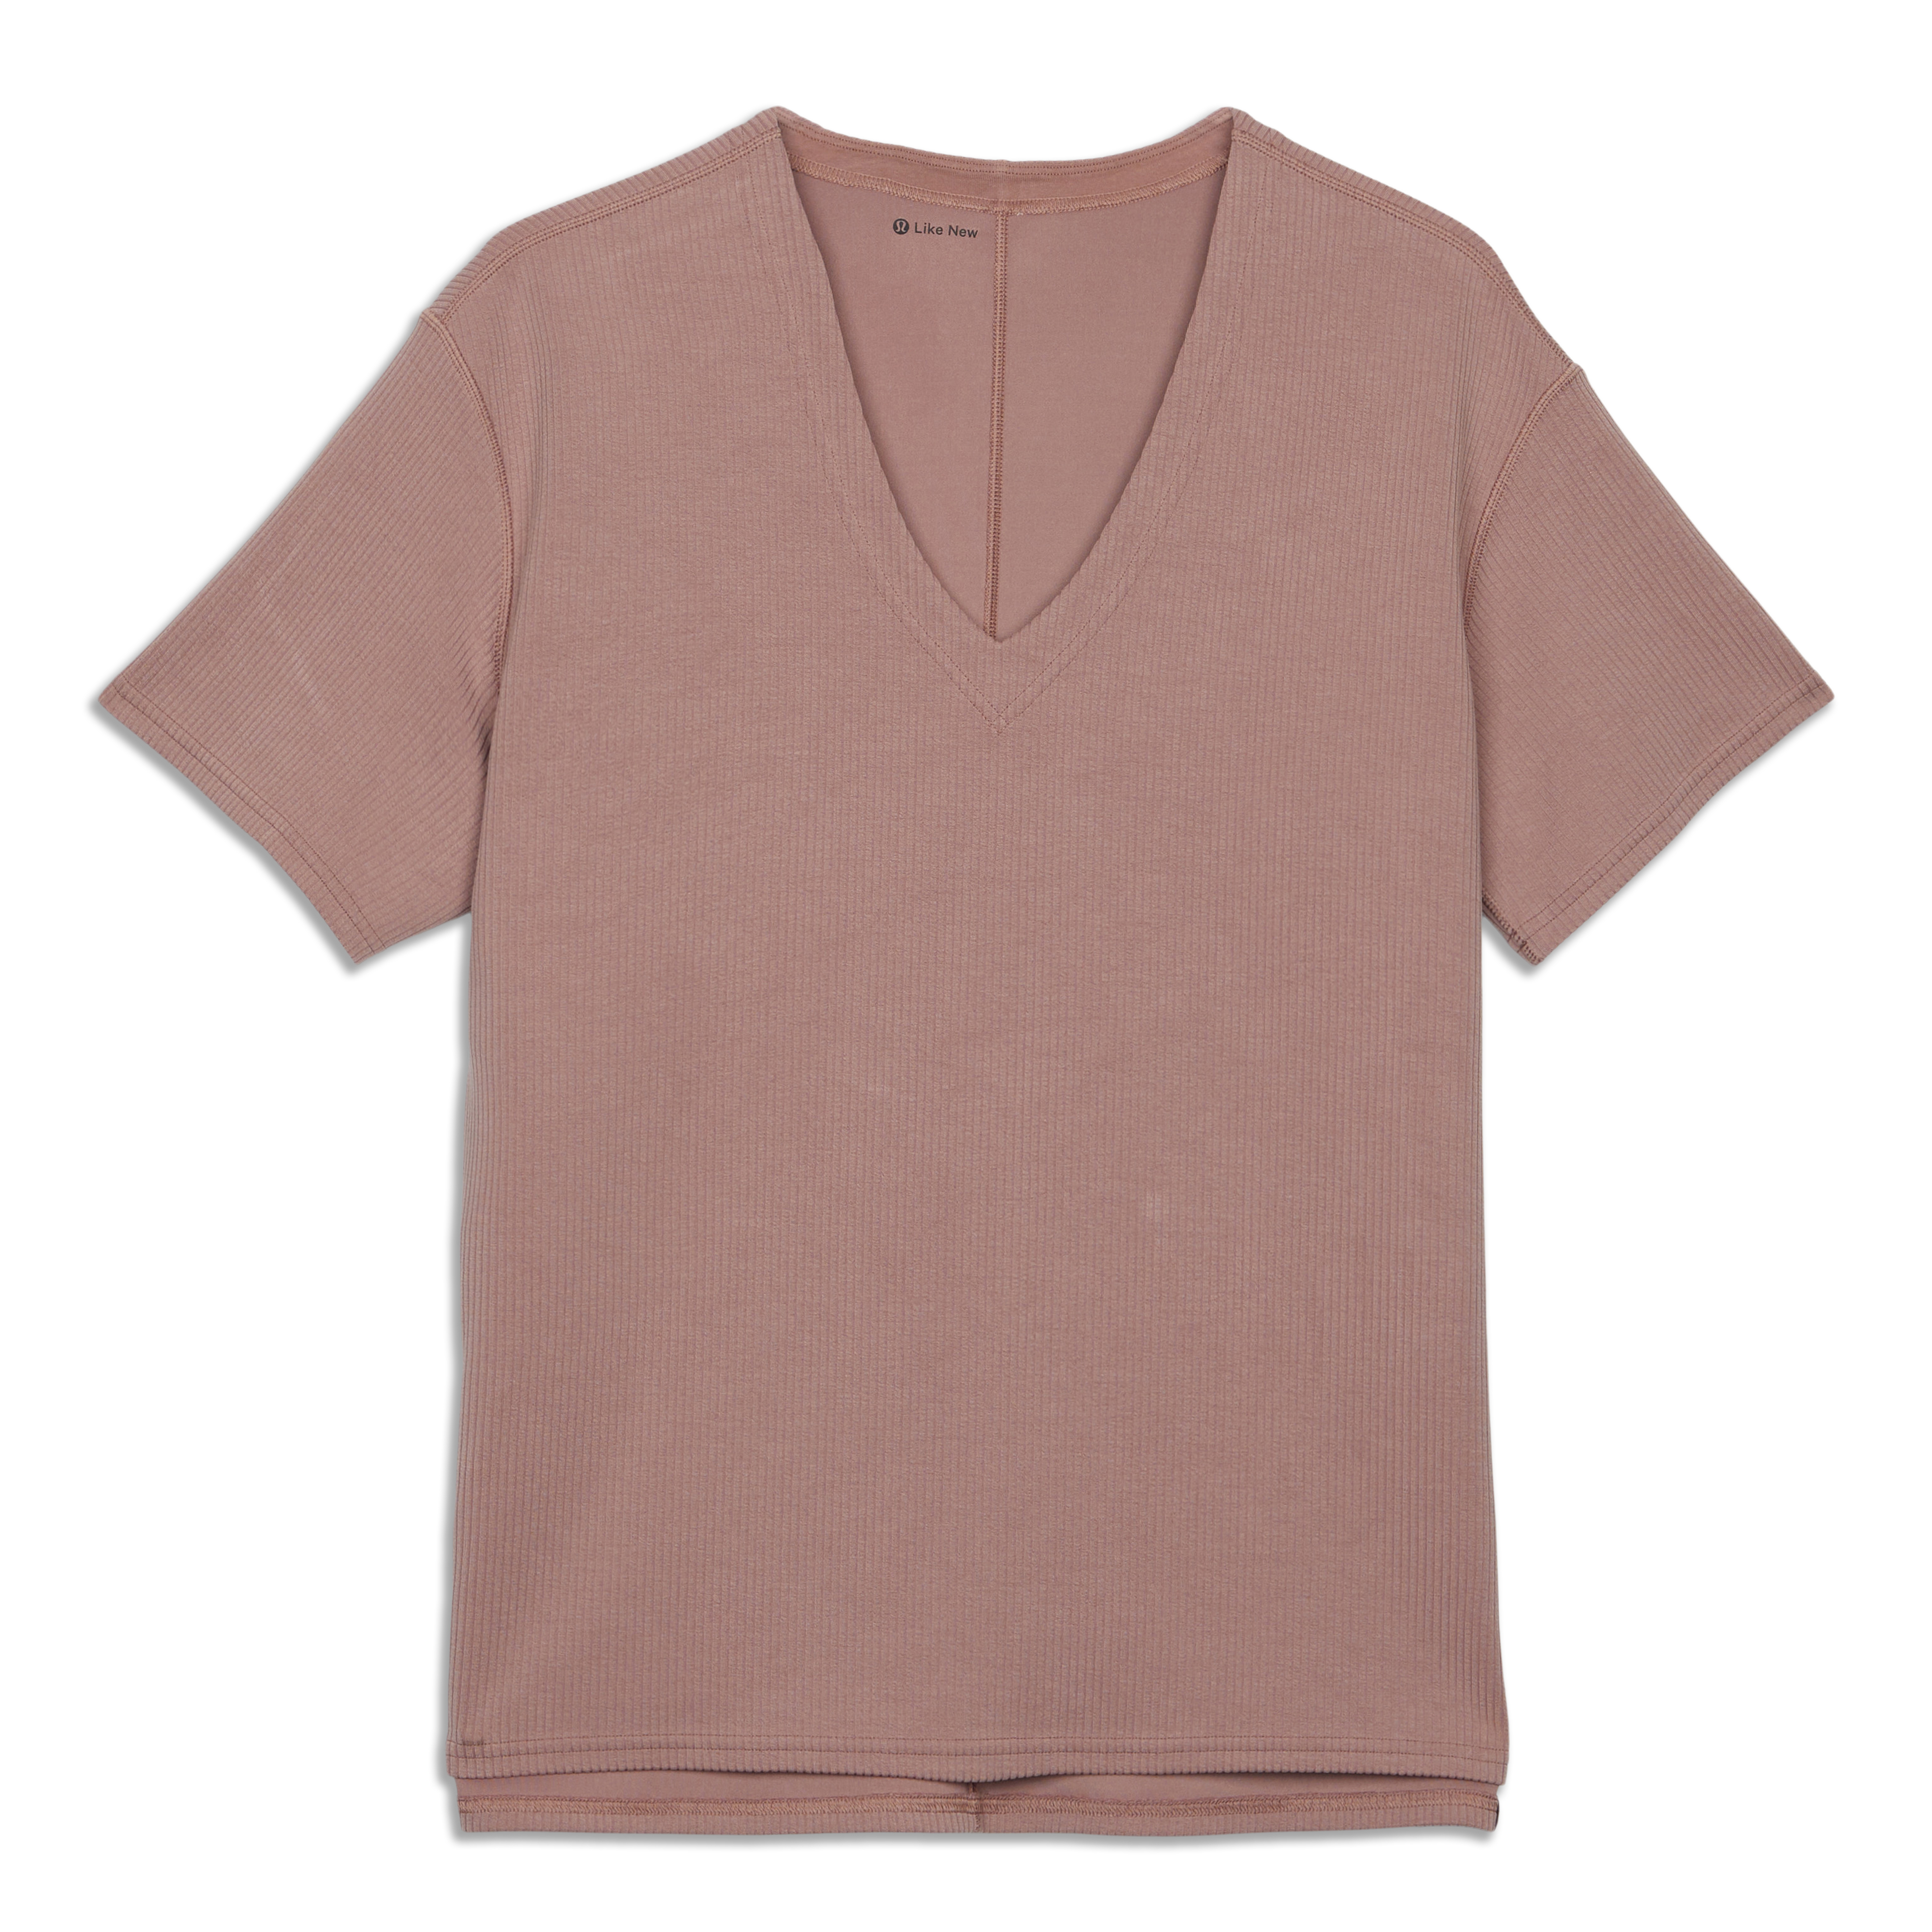 Sueded Scoop Neck Relaxed T-Shirt, WW0WW33799BDS